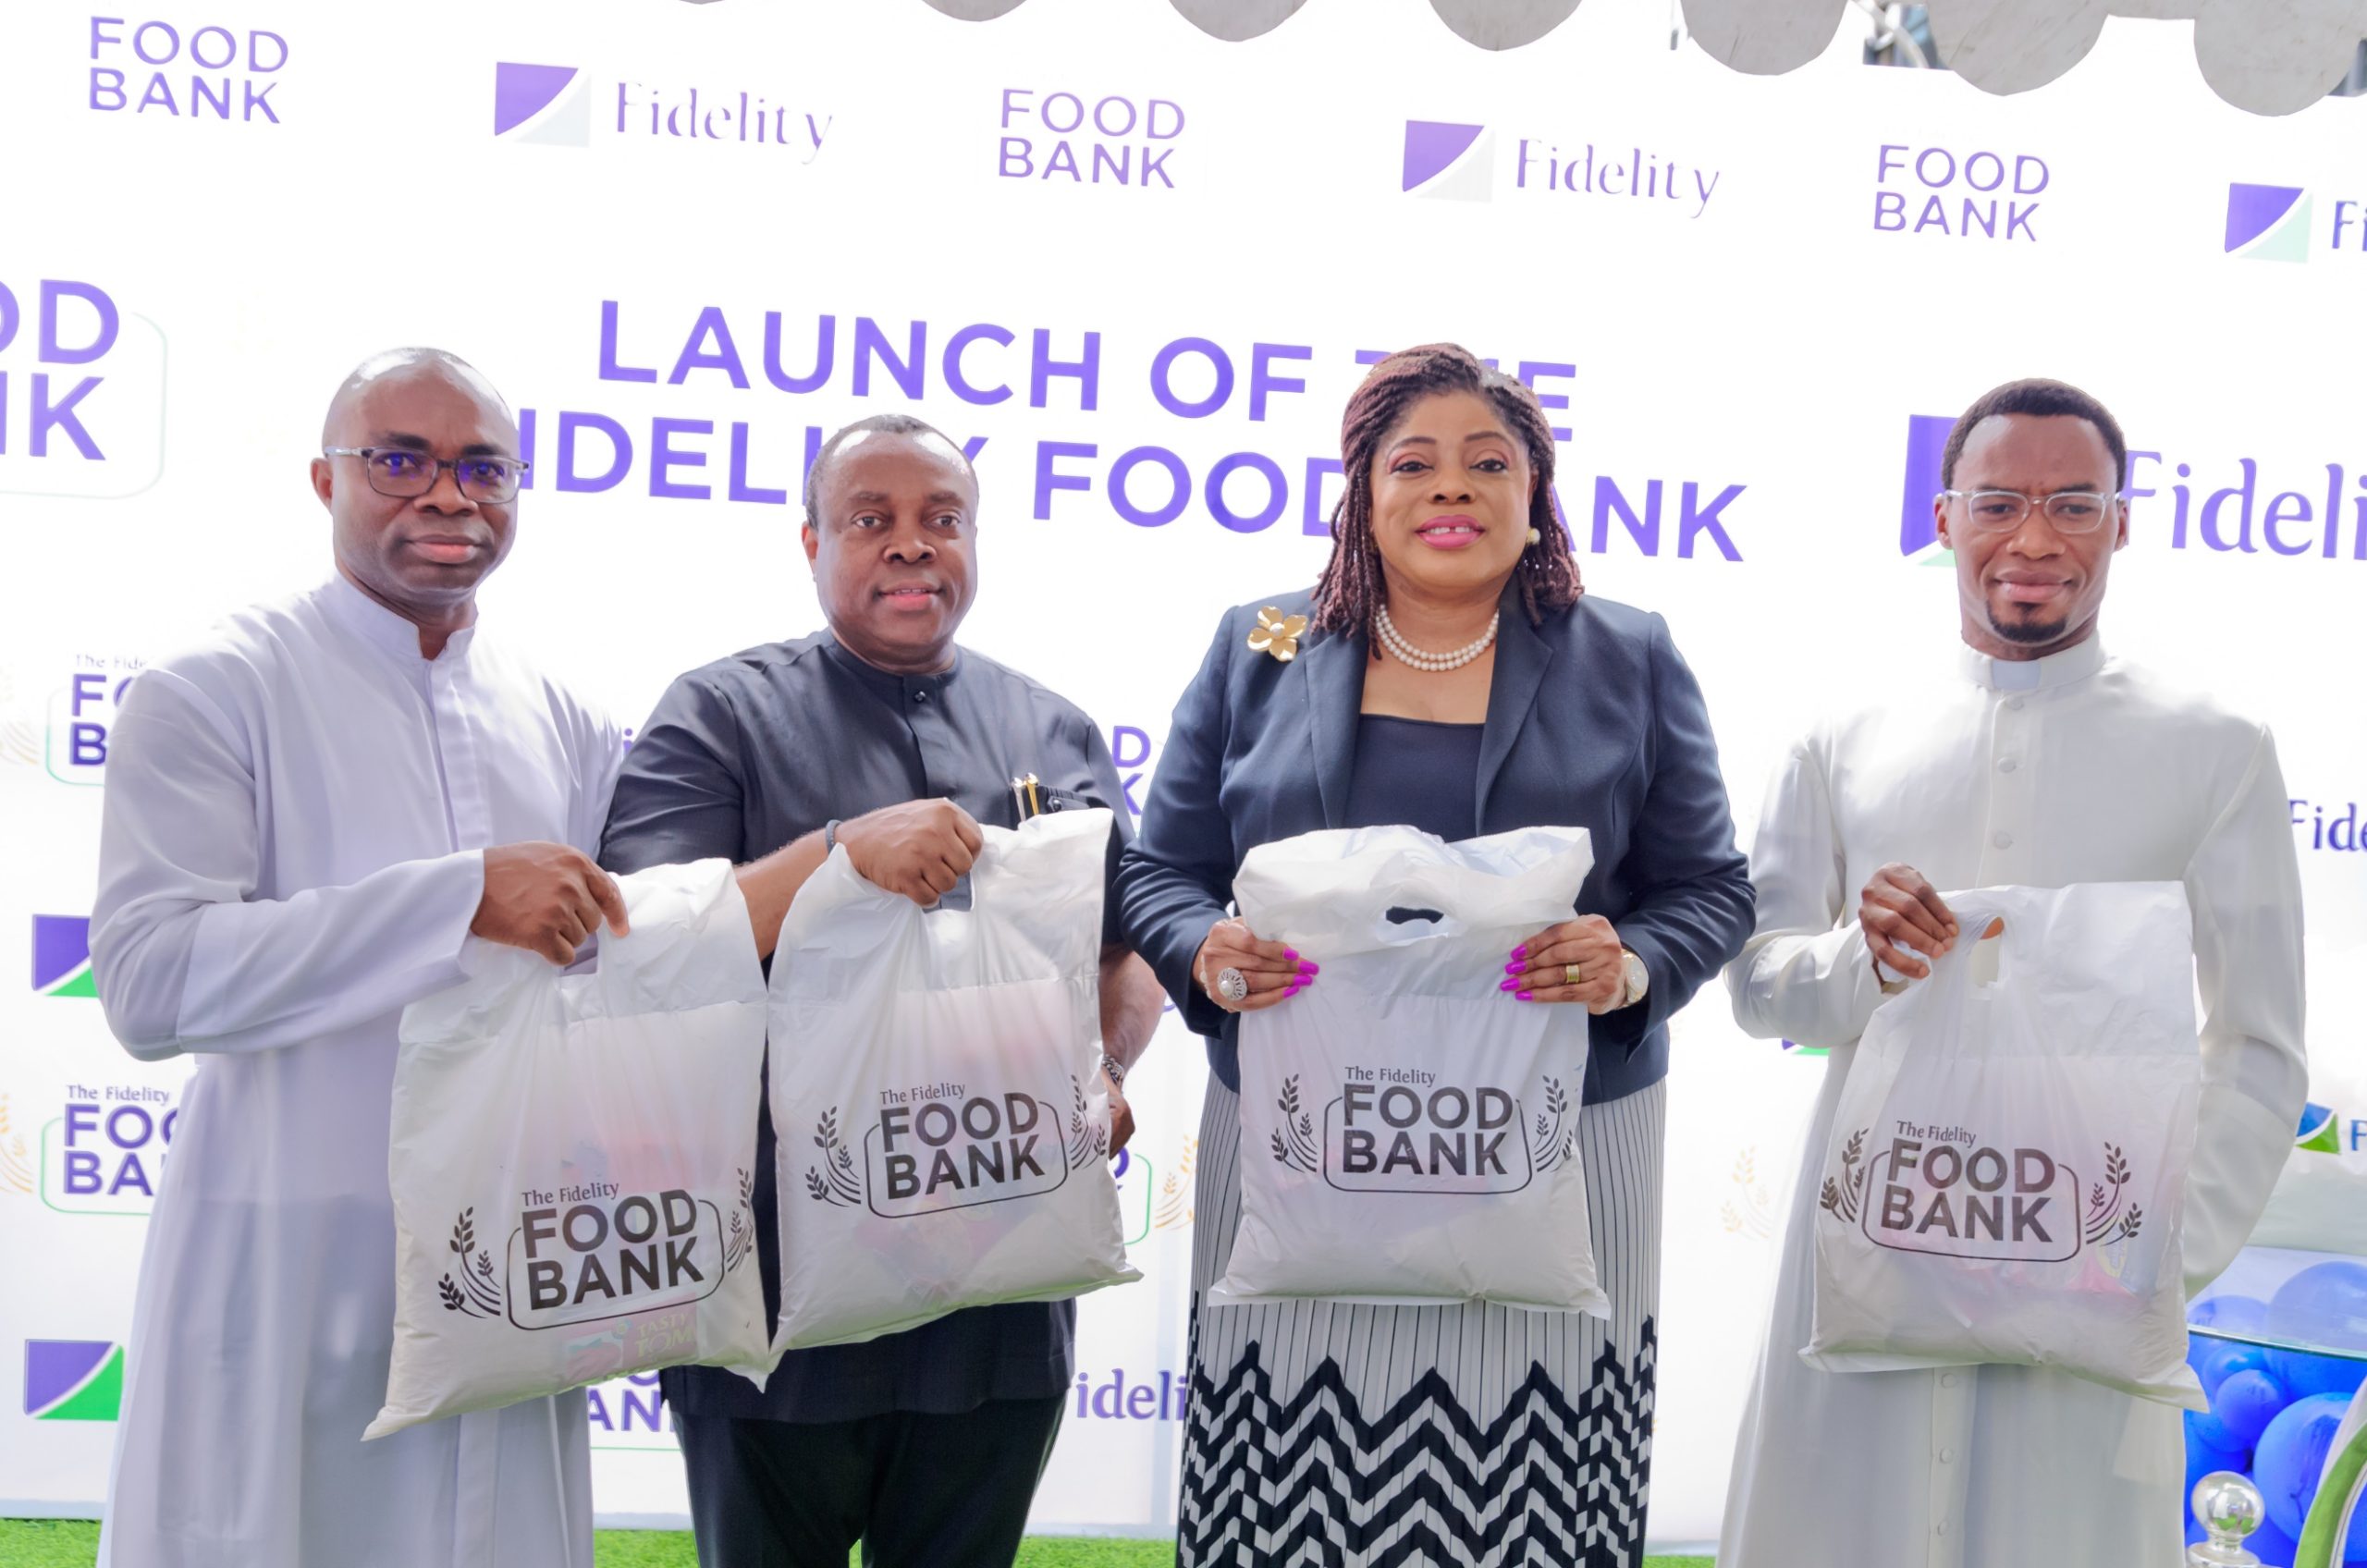 Fidelity Bank launches Food Bank Initiative nationwide